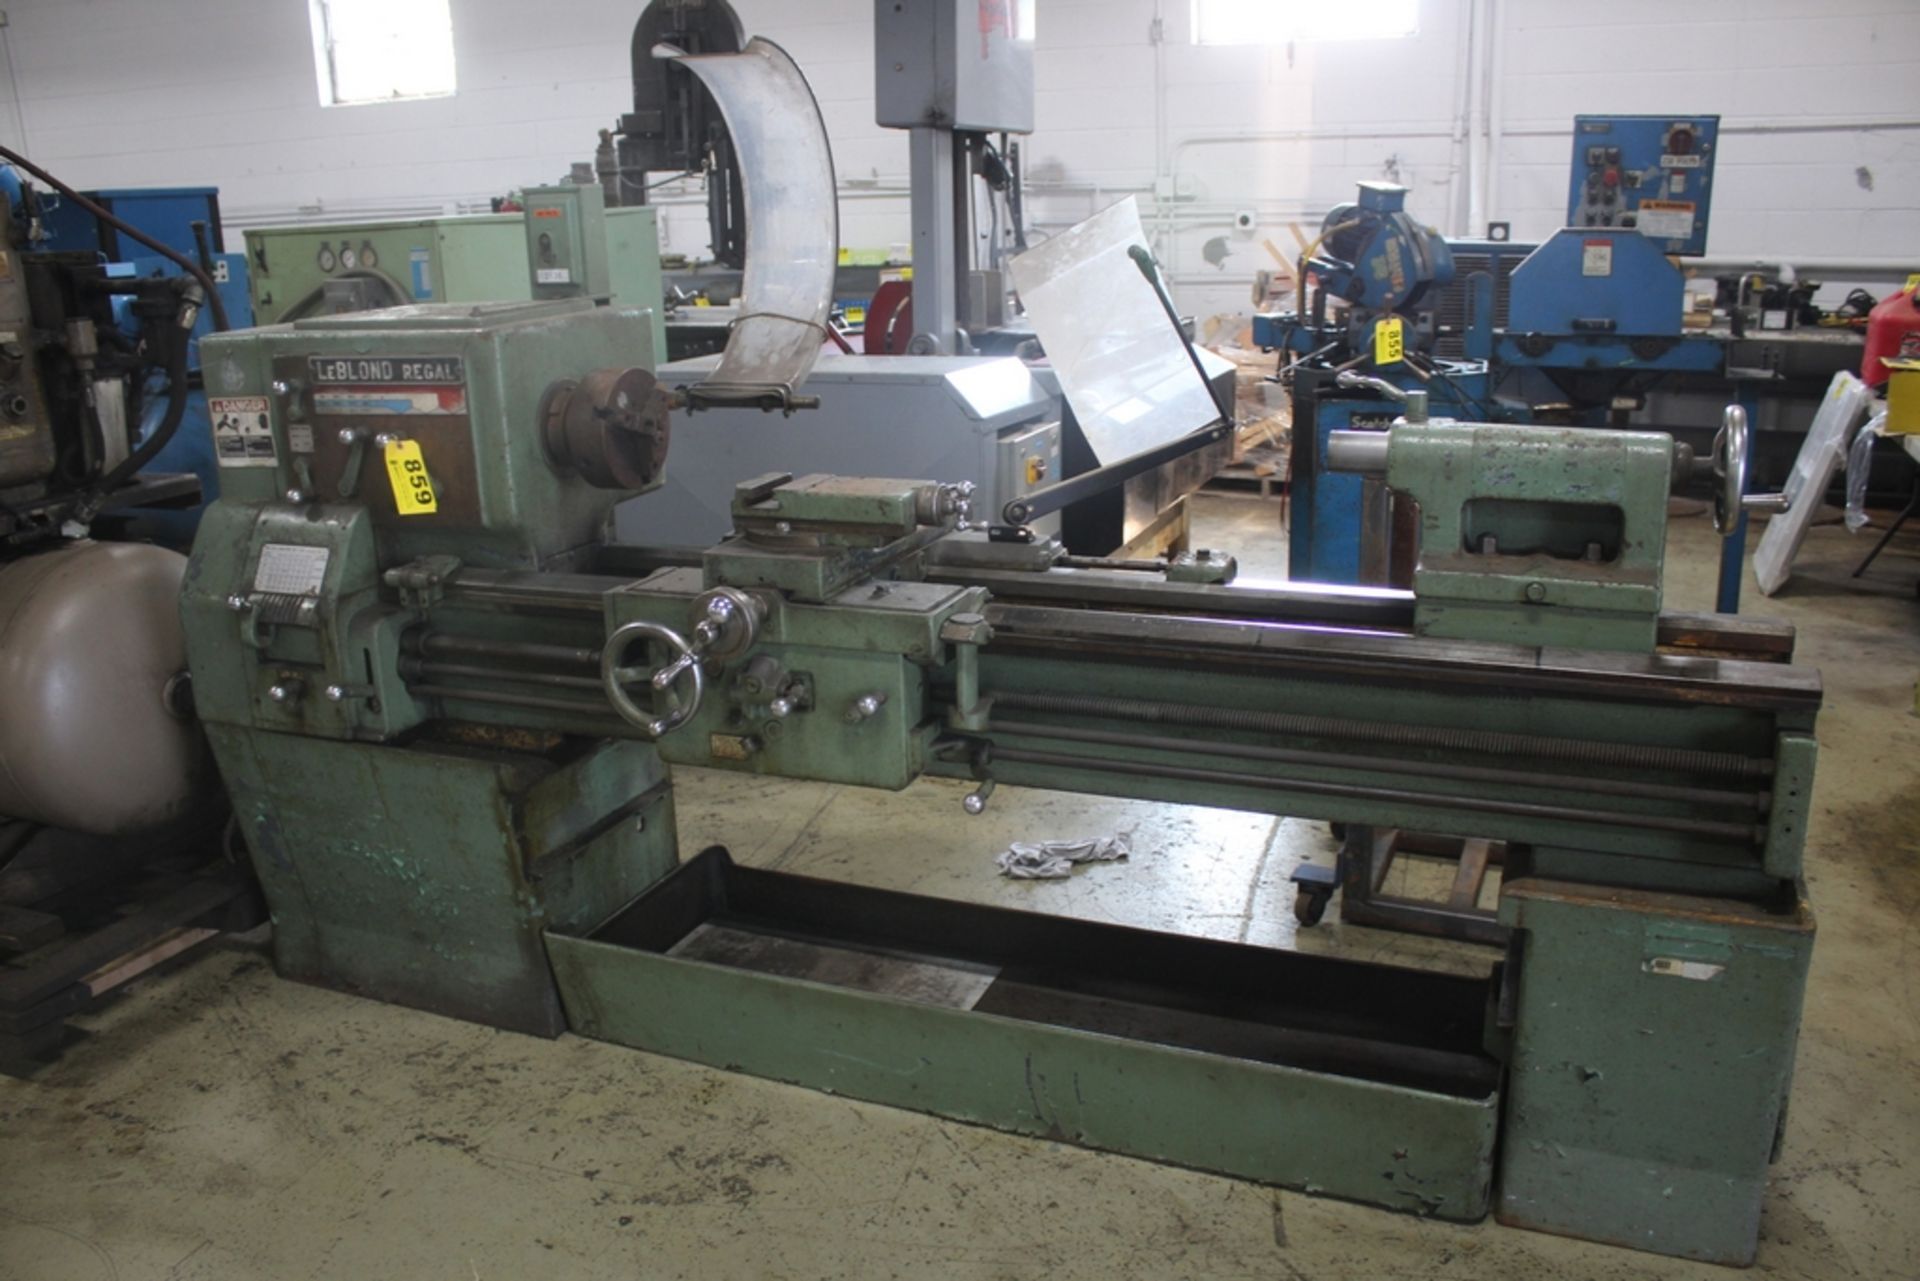 LEBLOND 19”X54” MODEL REGAL TOOLROOM LATHE, S/N 2F876, 1500 SPINDLE RPM, WITH 8” 3-JAW CHUCK, INCH